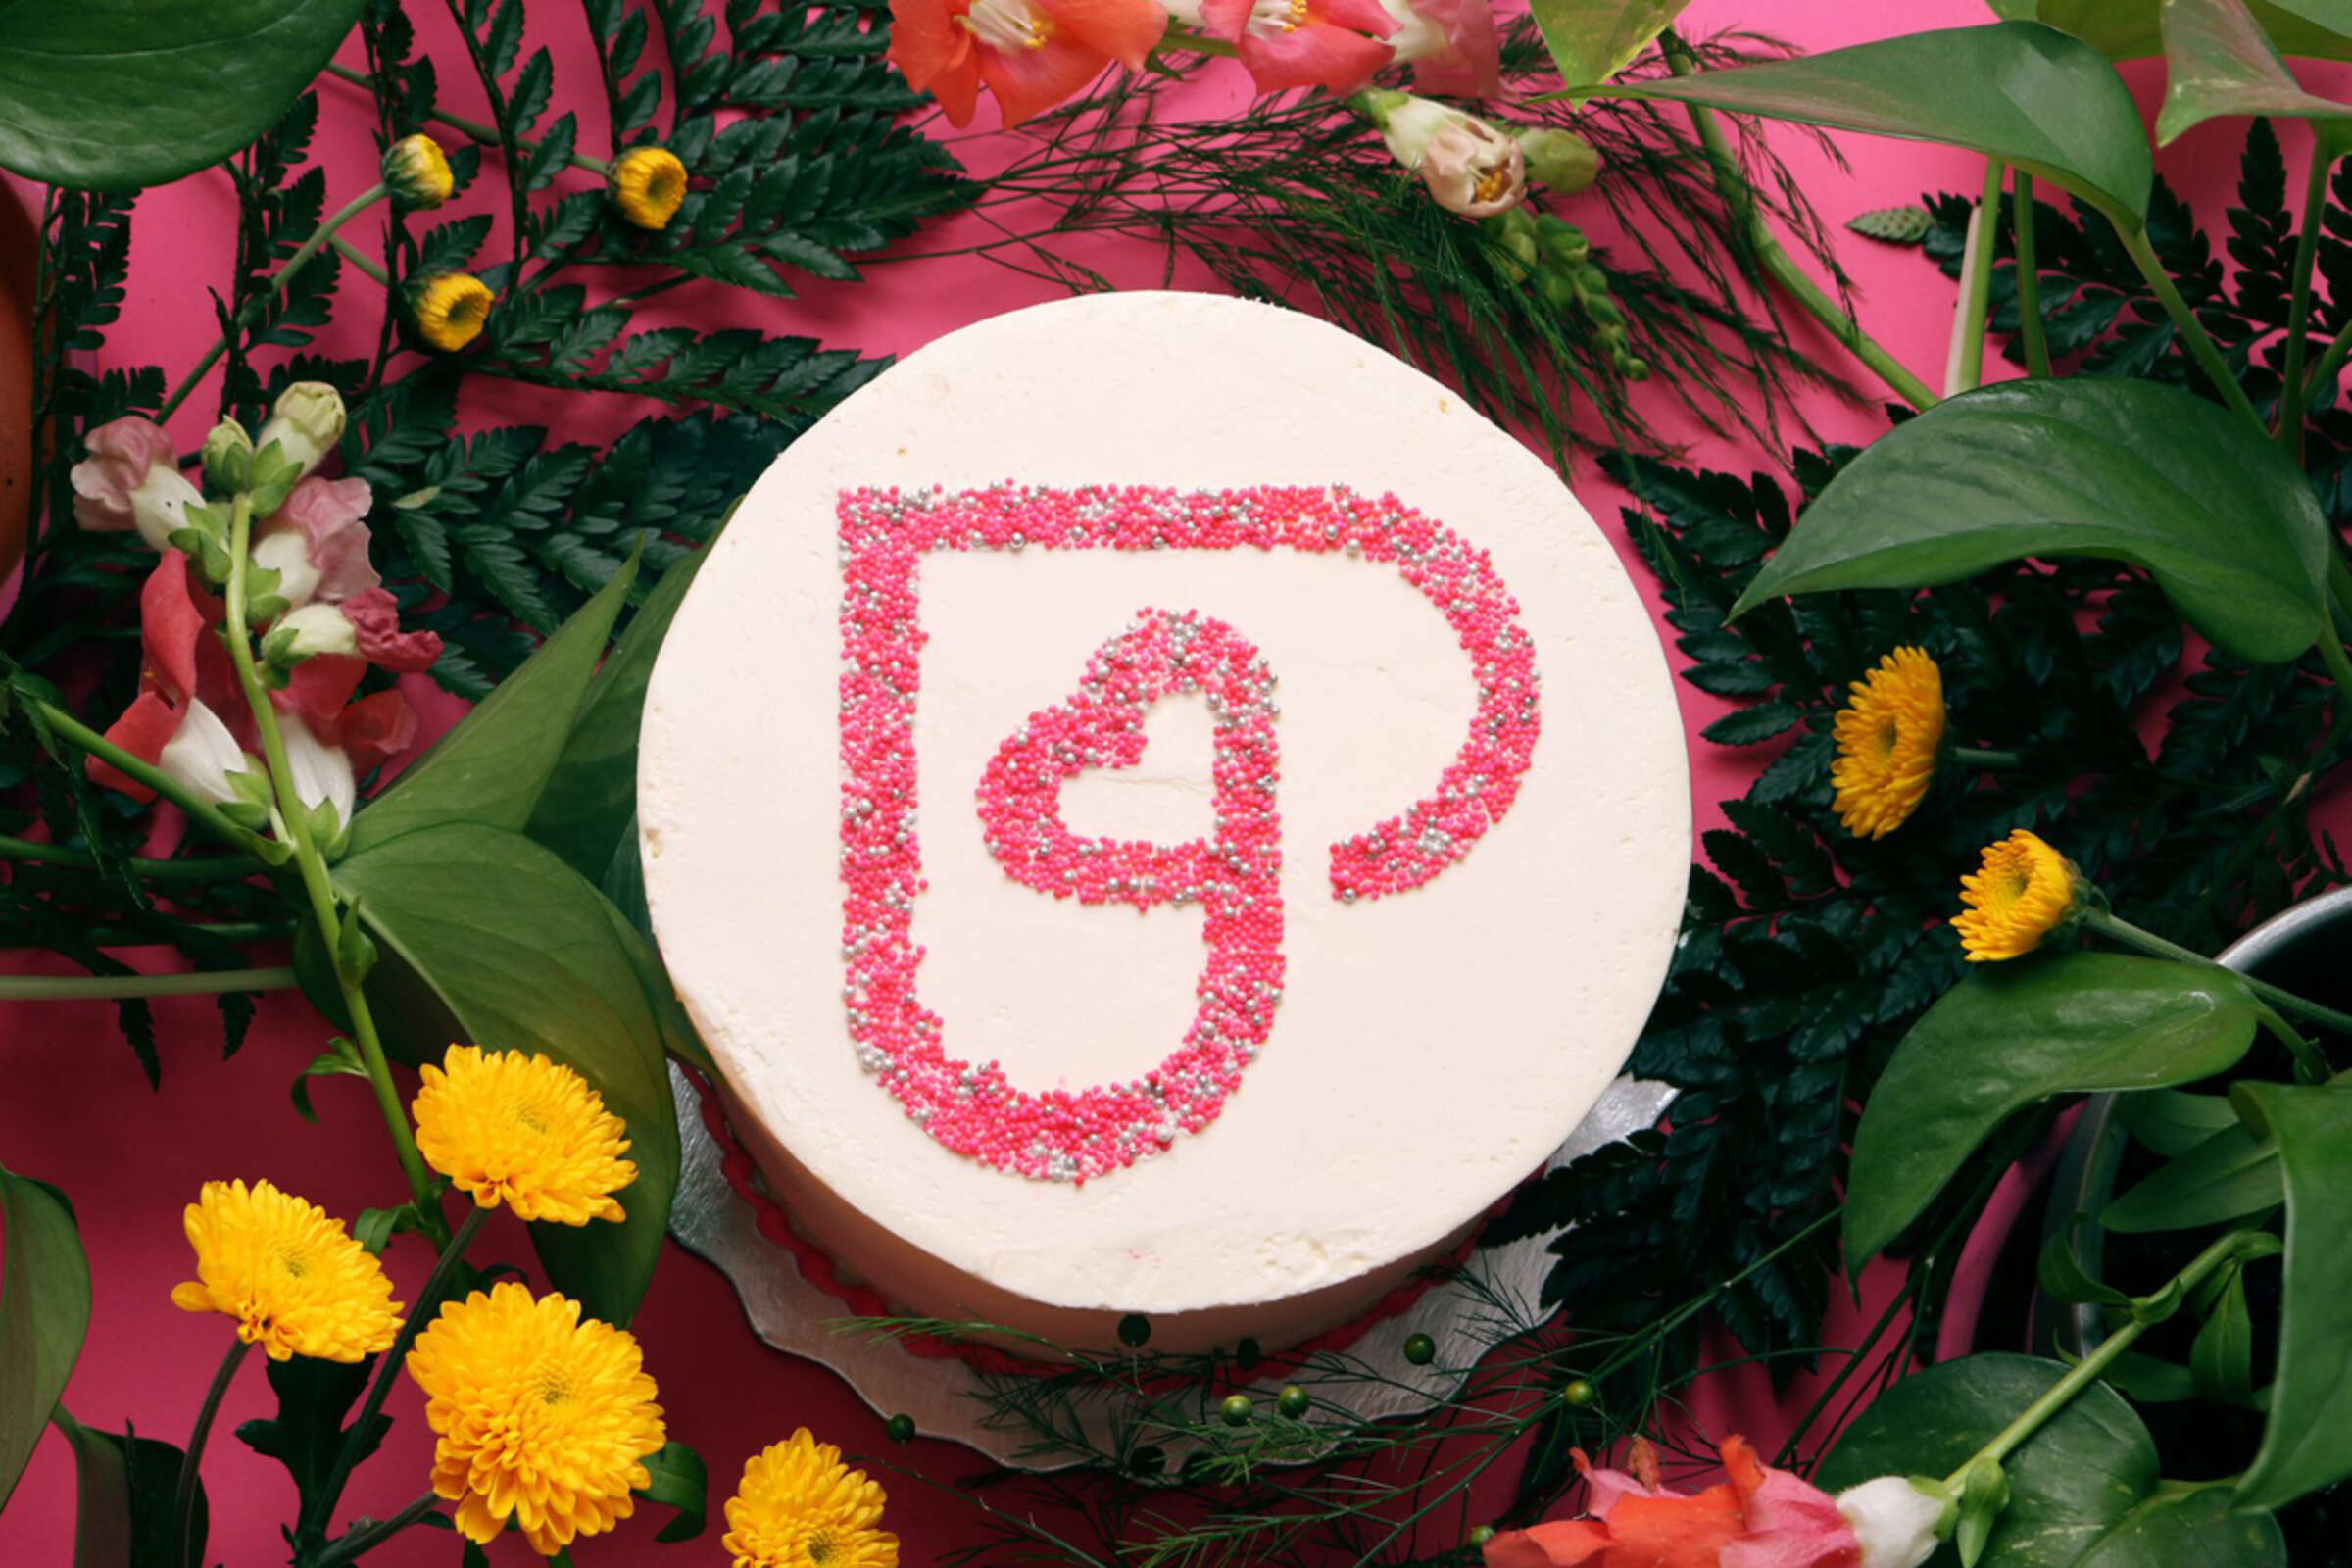 A round cake sits on a pink surface, surrounded by an arrangement of vibrant flowers and green foliage. The cake is frosted with white icing and decorated with a red heart design made from sprinkles in the center.